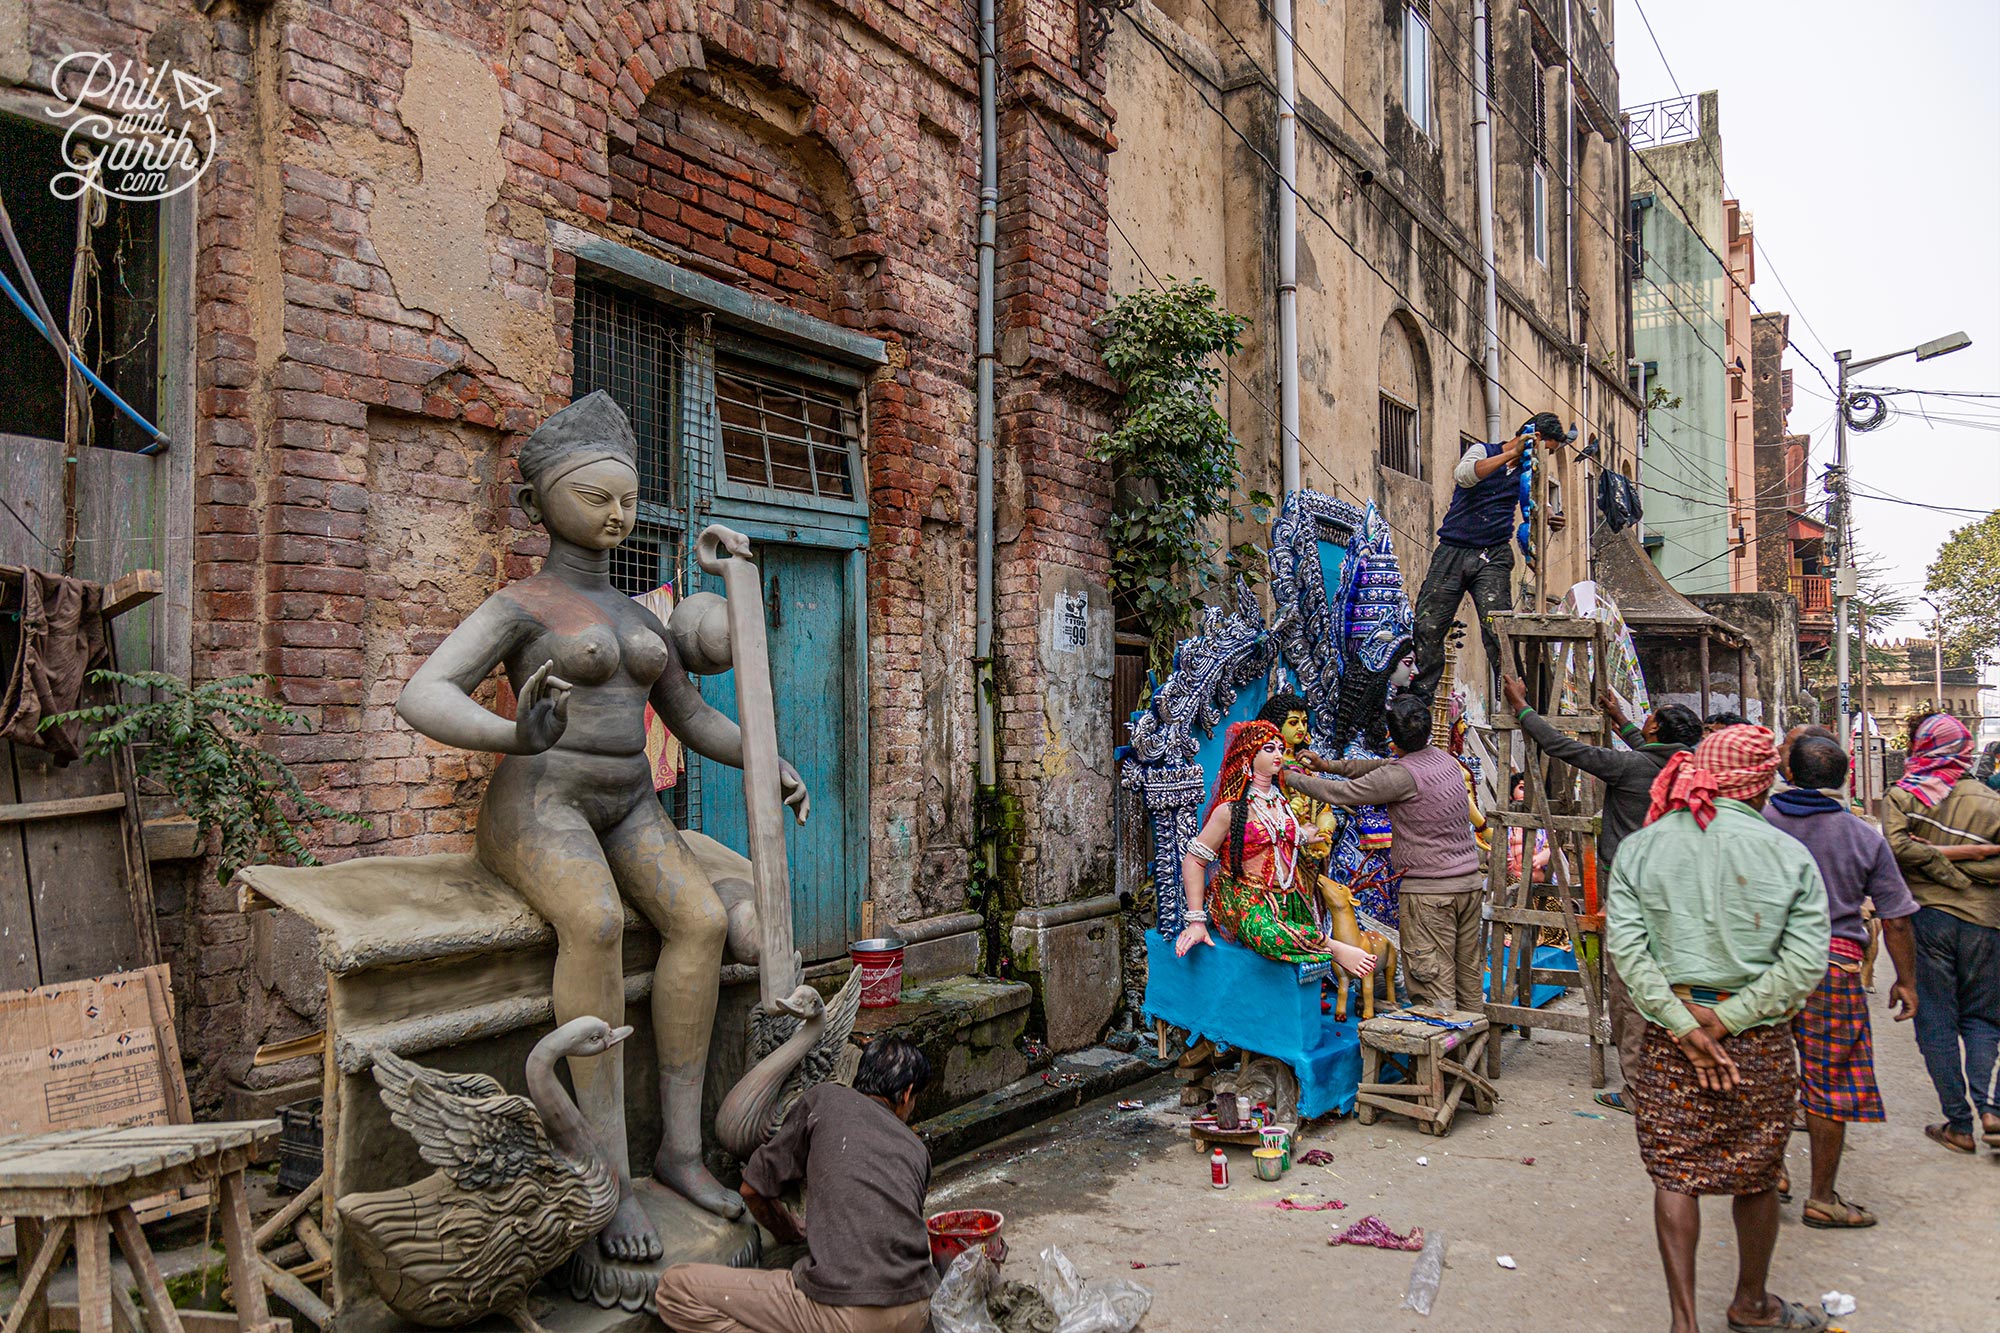 The clay modellers work on the streets and in back to back artist studios